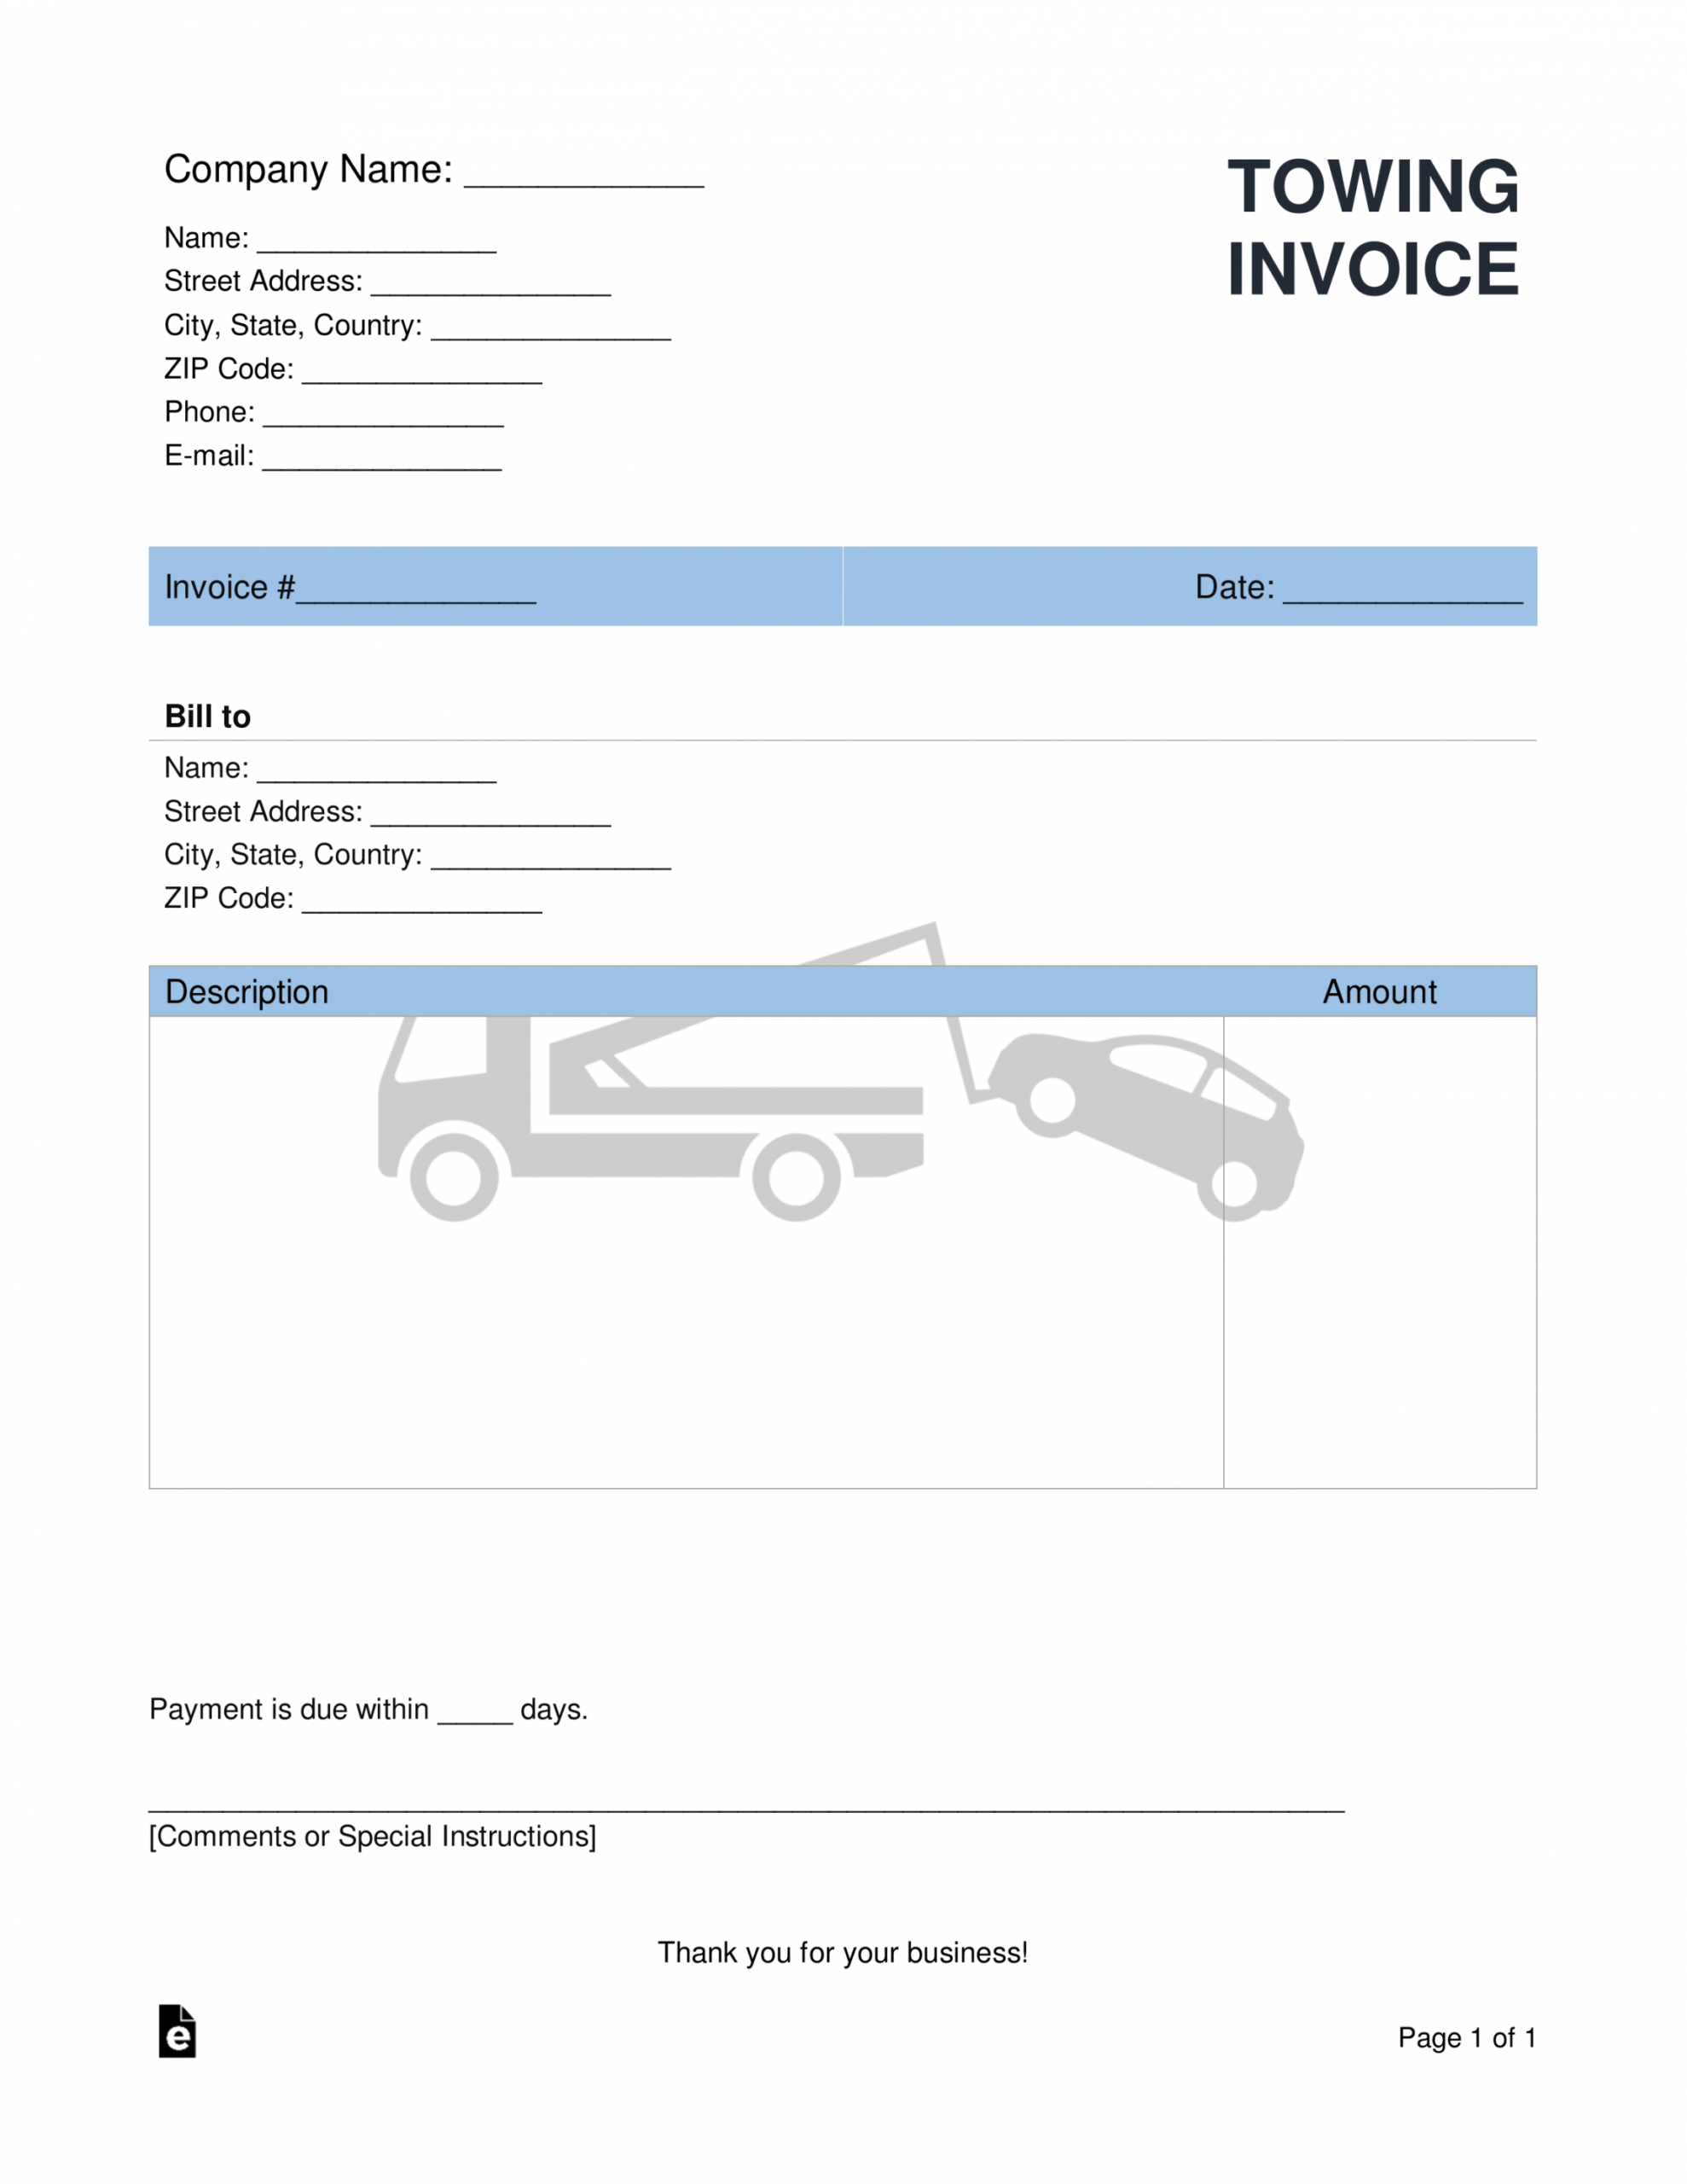 Tow Truck Receipt Template | Emetonlineblog pertaining to Towing Business Plan Template